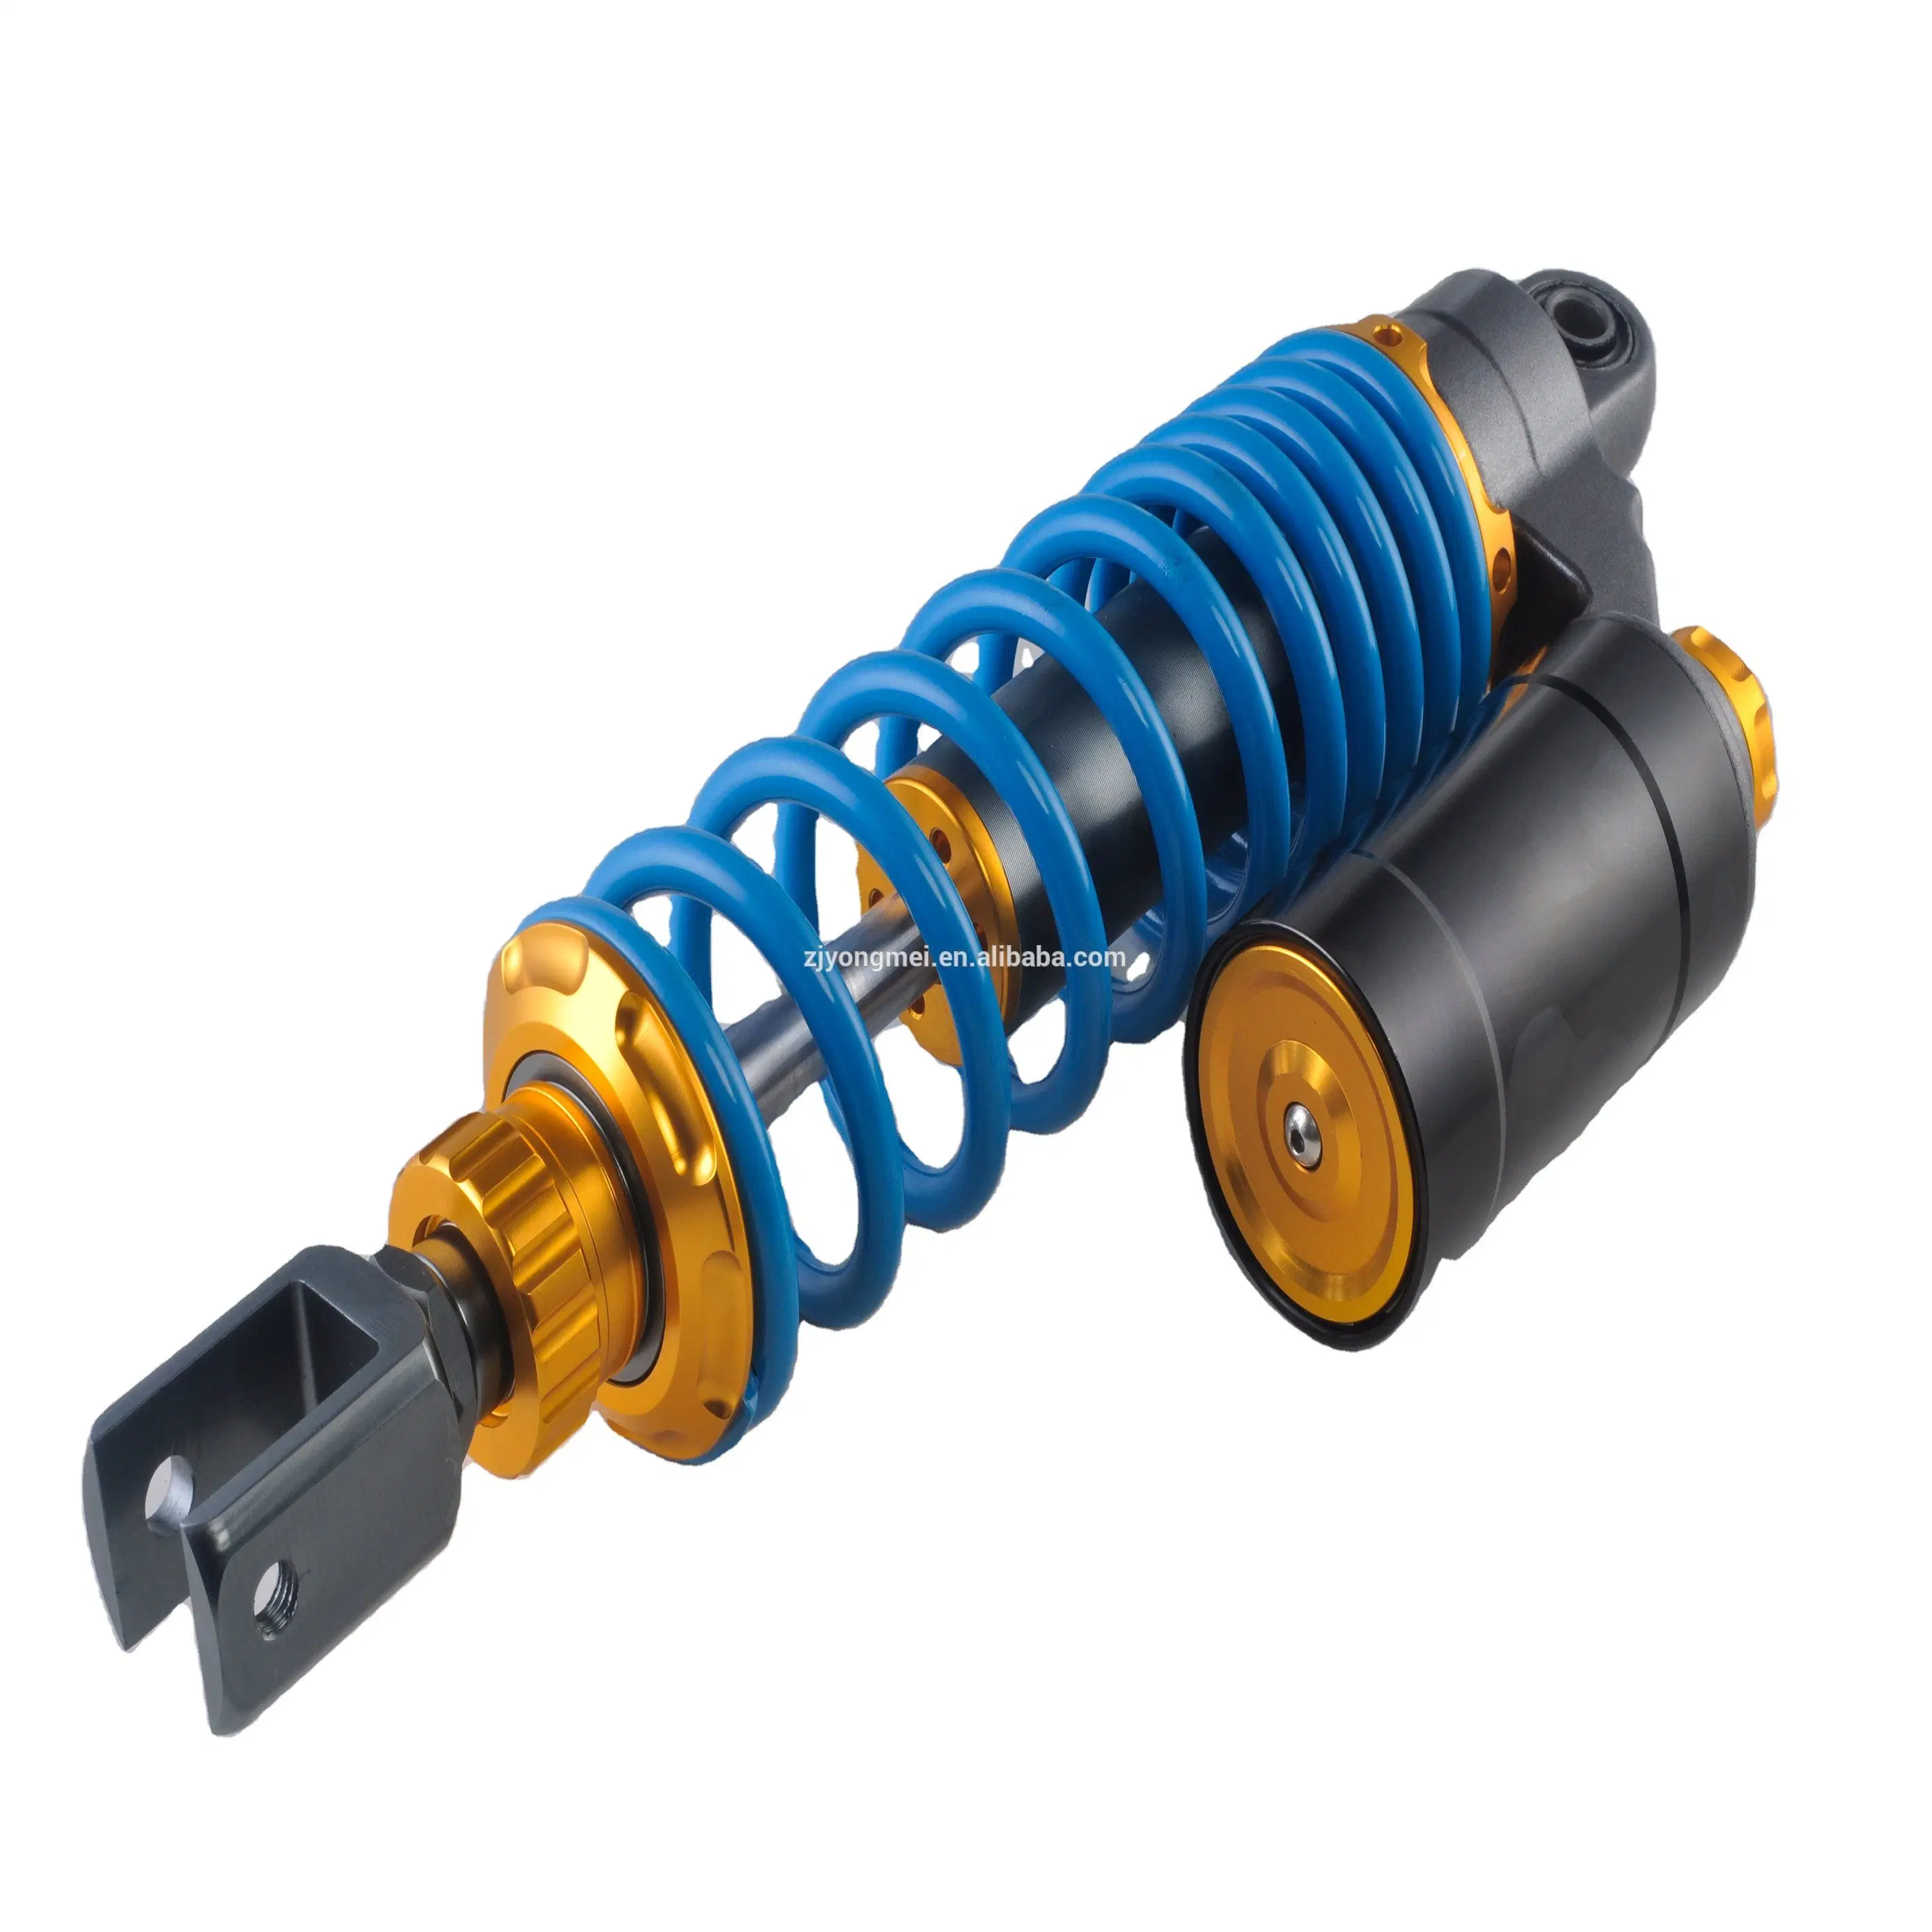 Double Rear Adjustable Shock Absorber with Airbag for Motorcycle